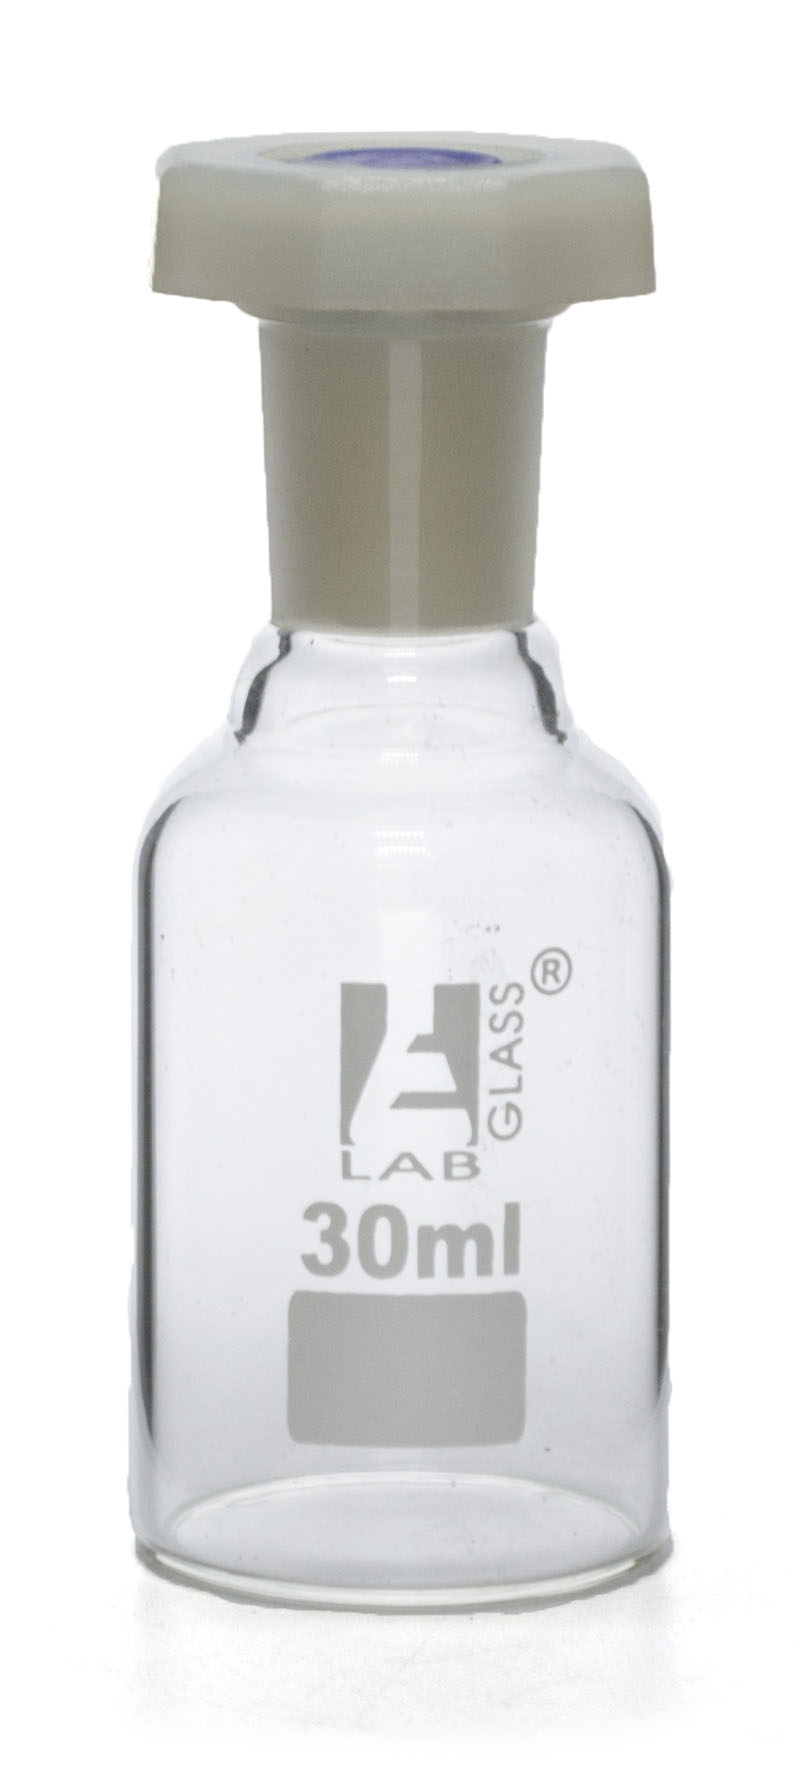 Clear Borosilicate Glass Reagent Bottle with Polyethylene Stopper, 30 ml, Narrow Mouth, Autoclavable